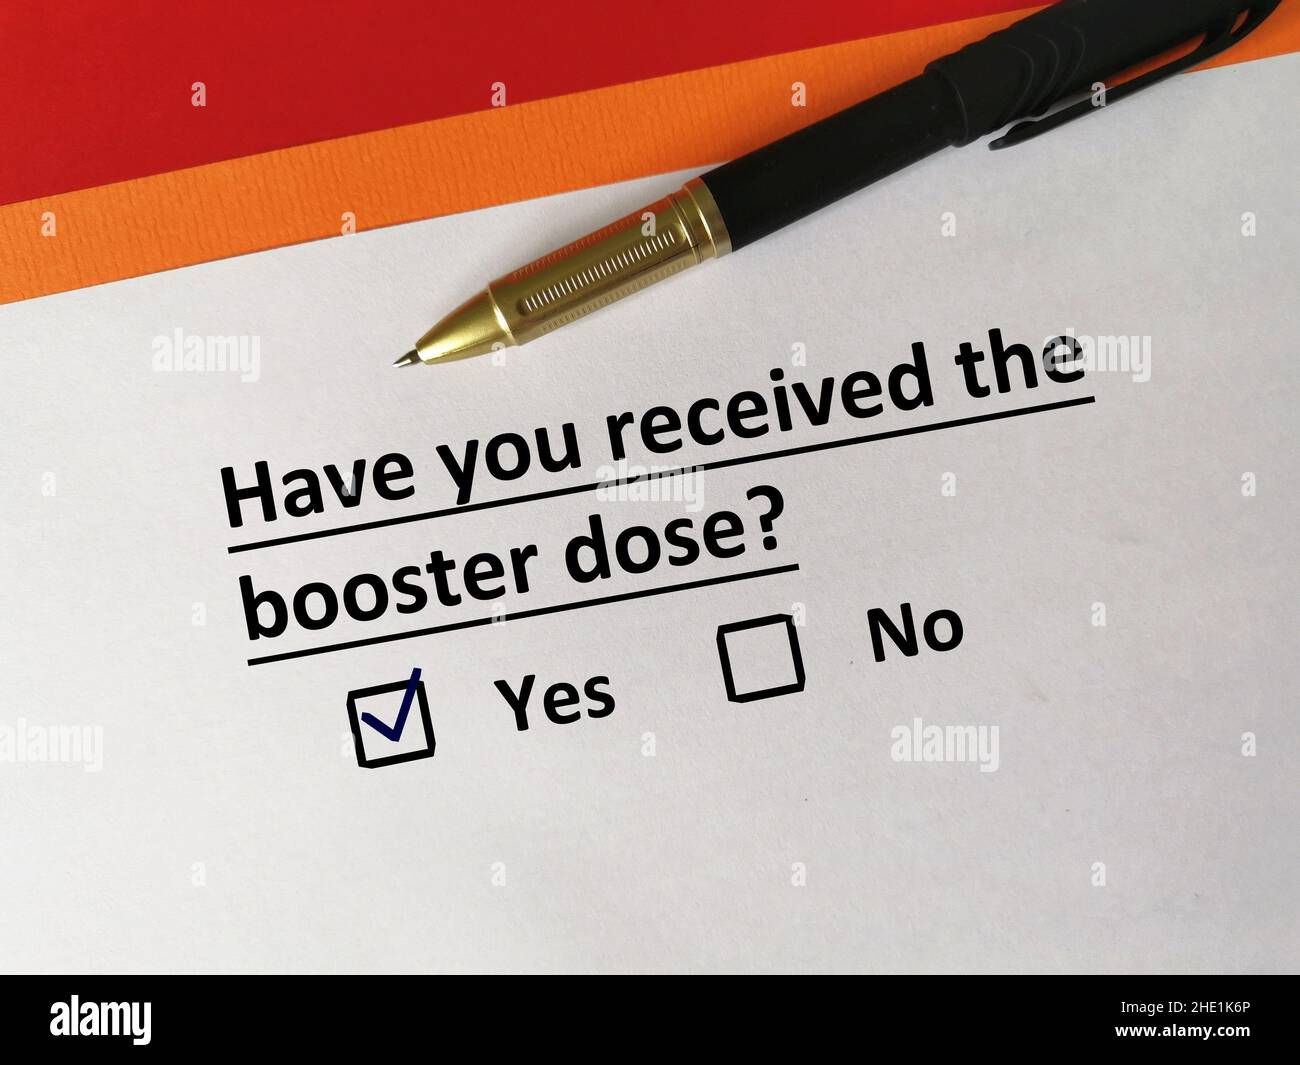 One person is answering question about vaccines. The person received the booster dose. Stock Photo